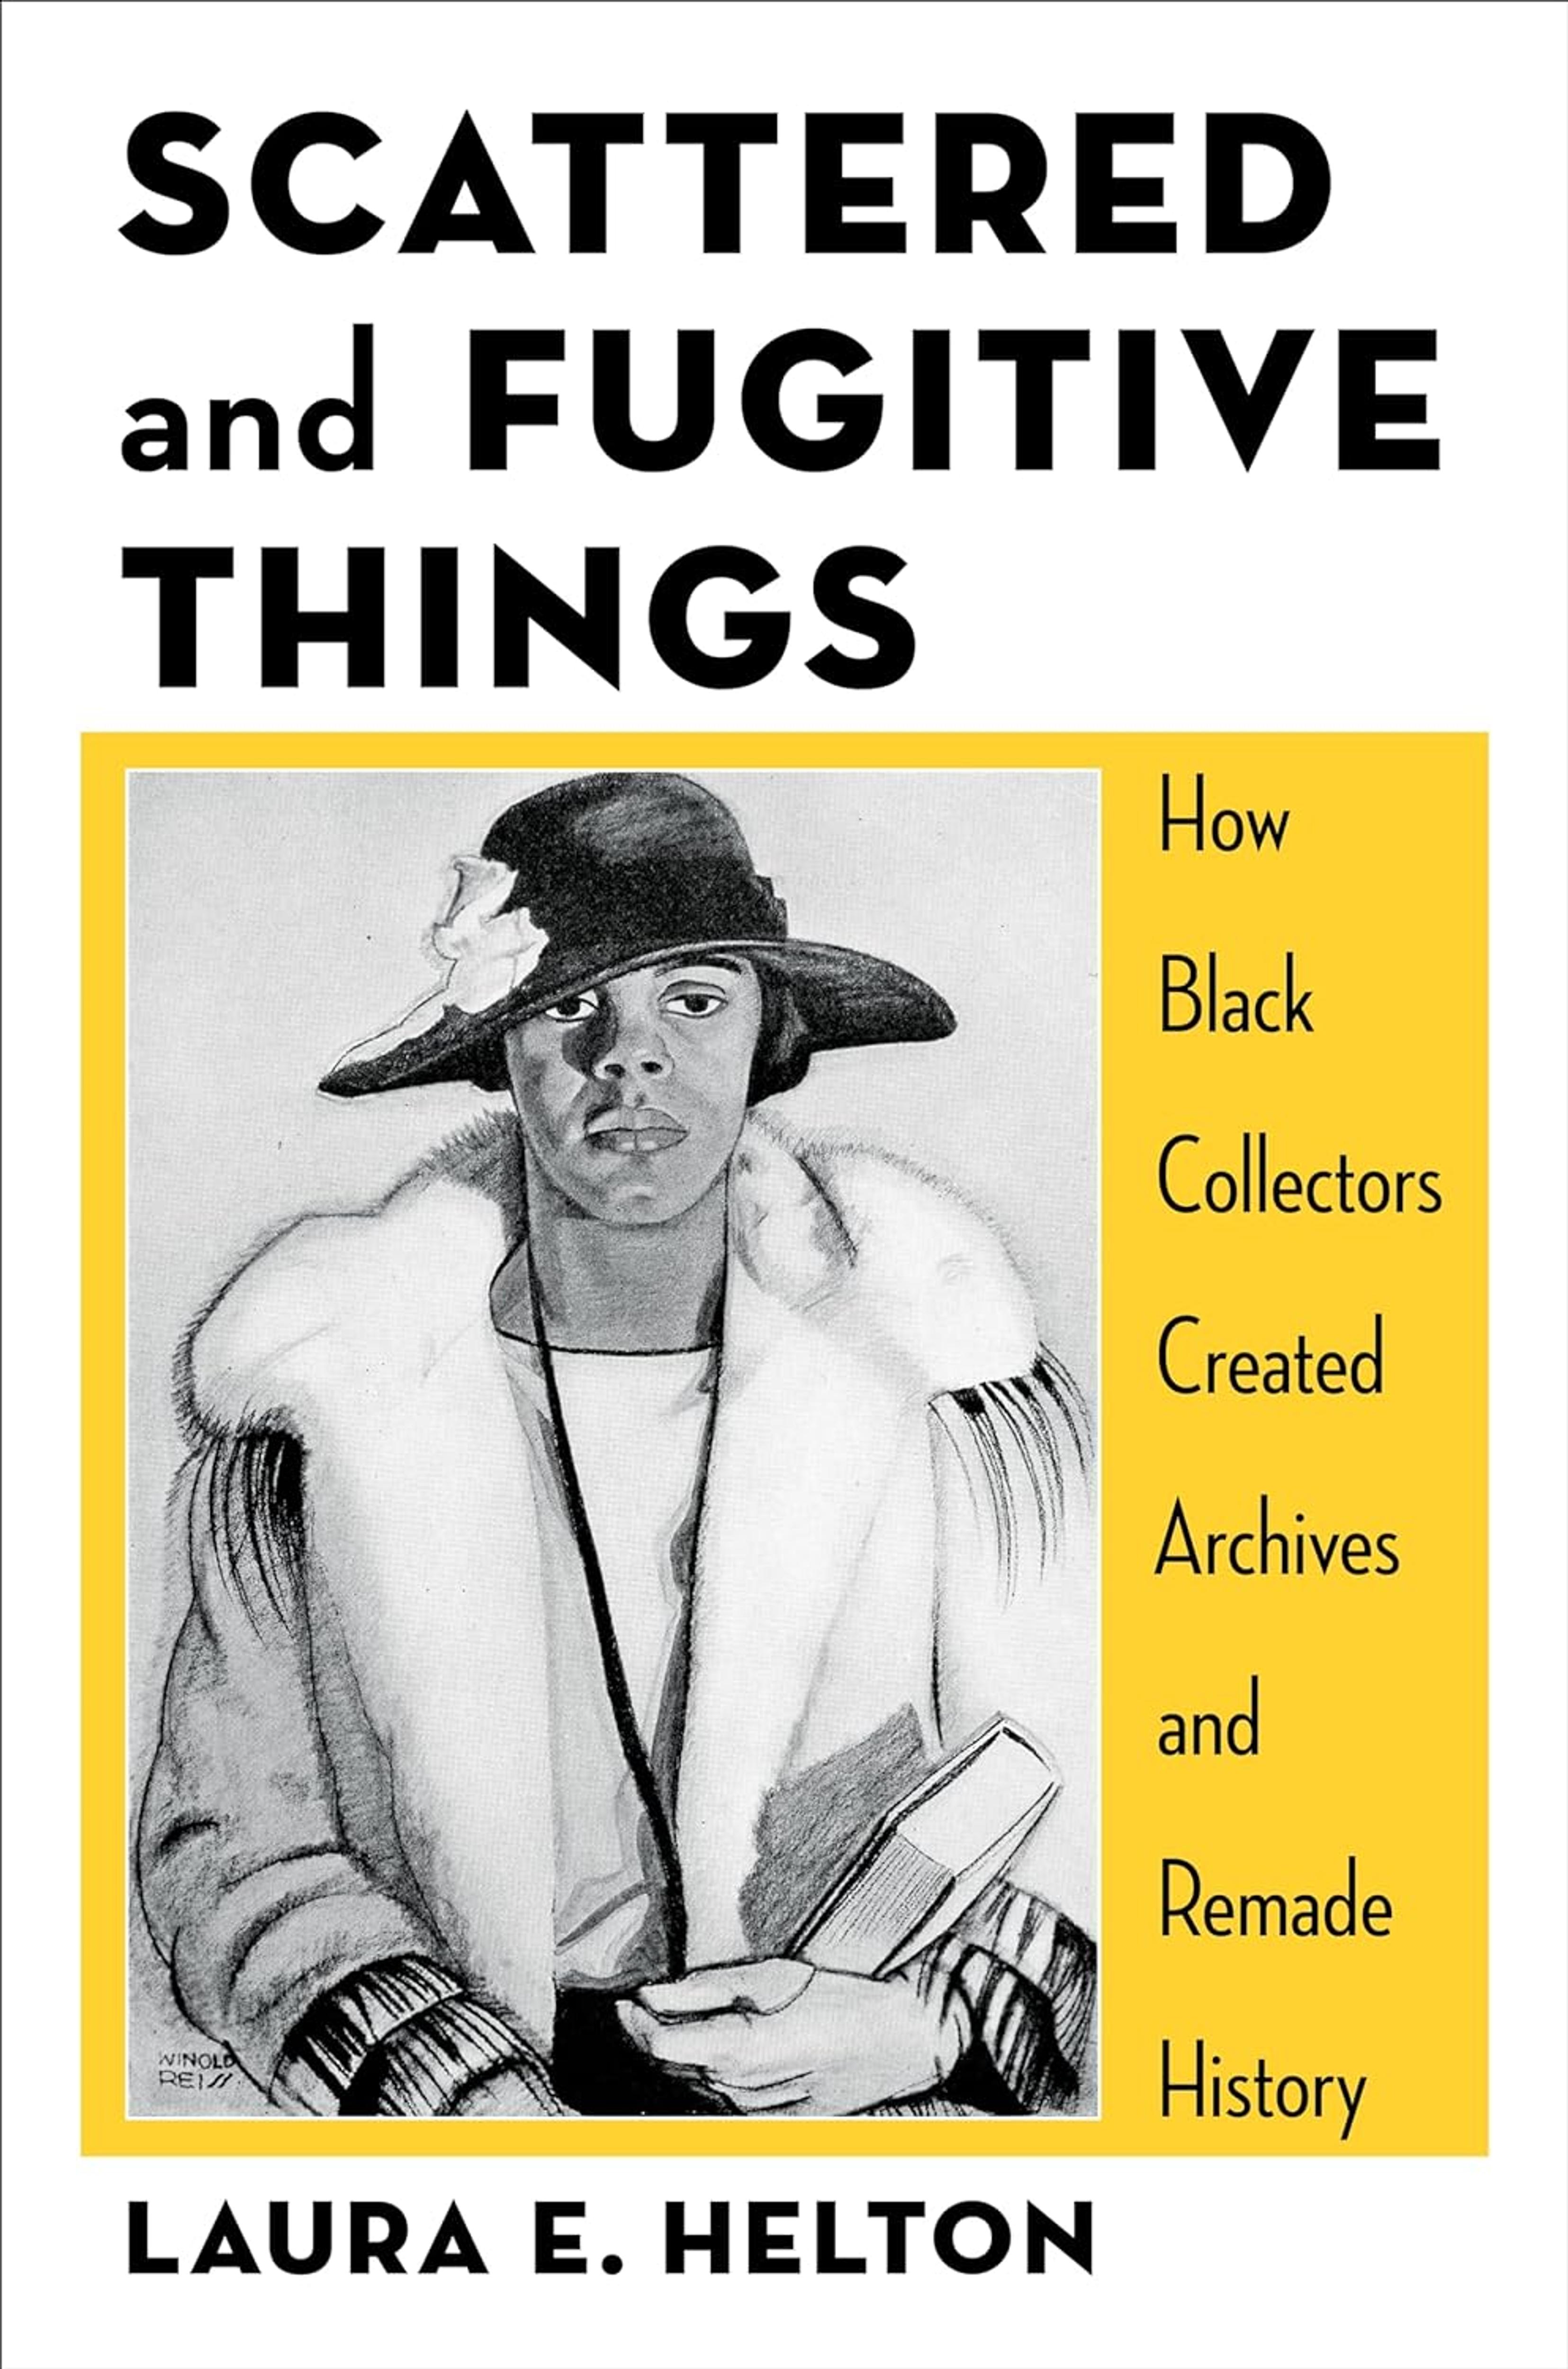 Black Archives, Not Archives of Blackness: On Laura Helton’s “Scattered and Fugitive Things”